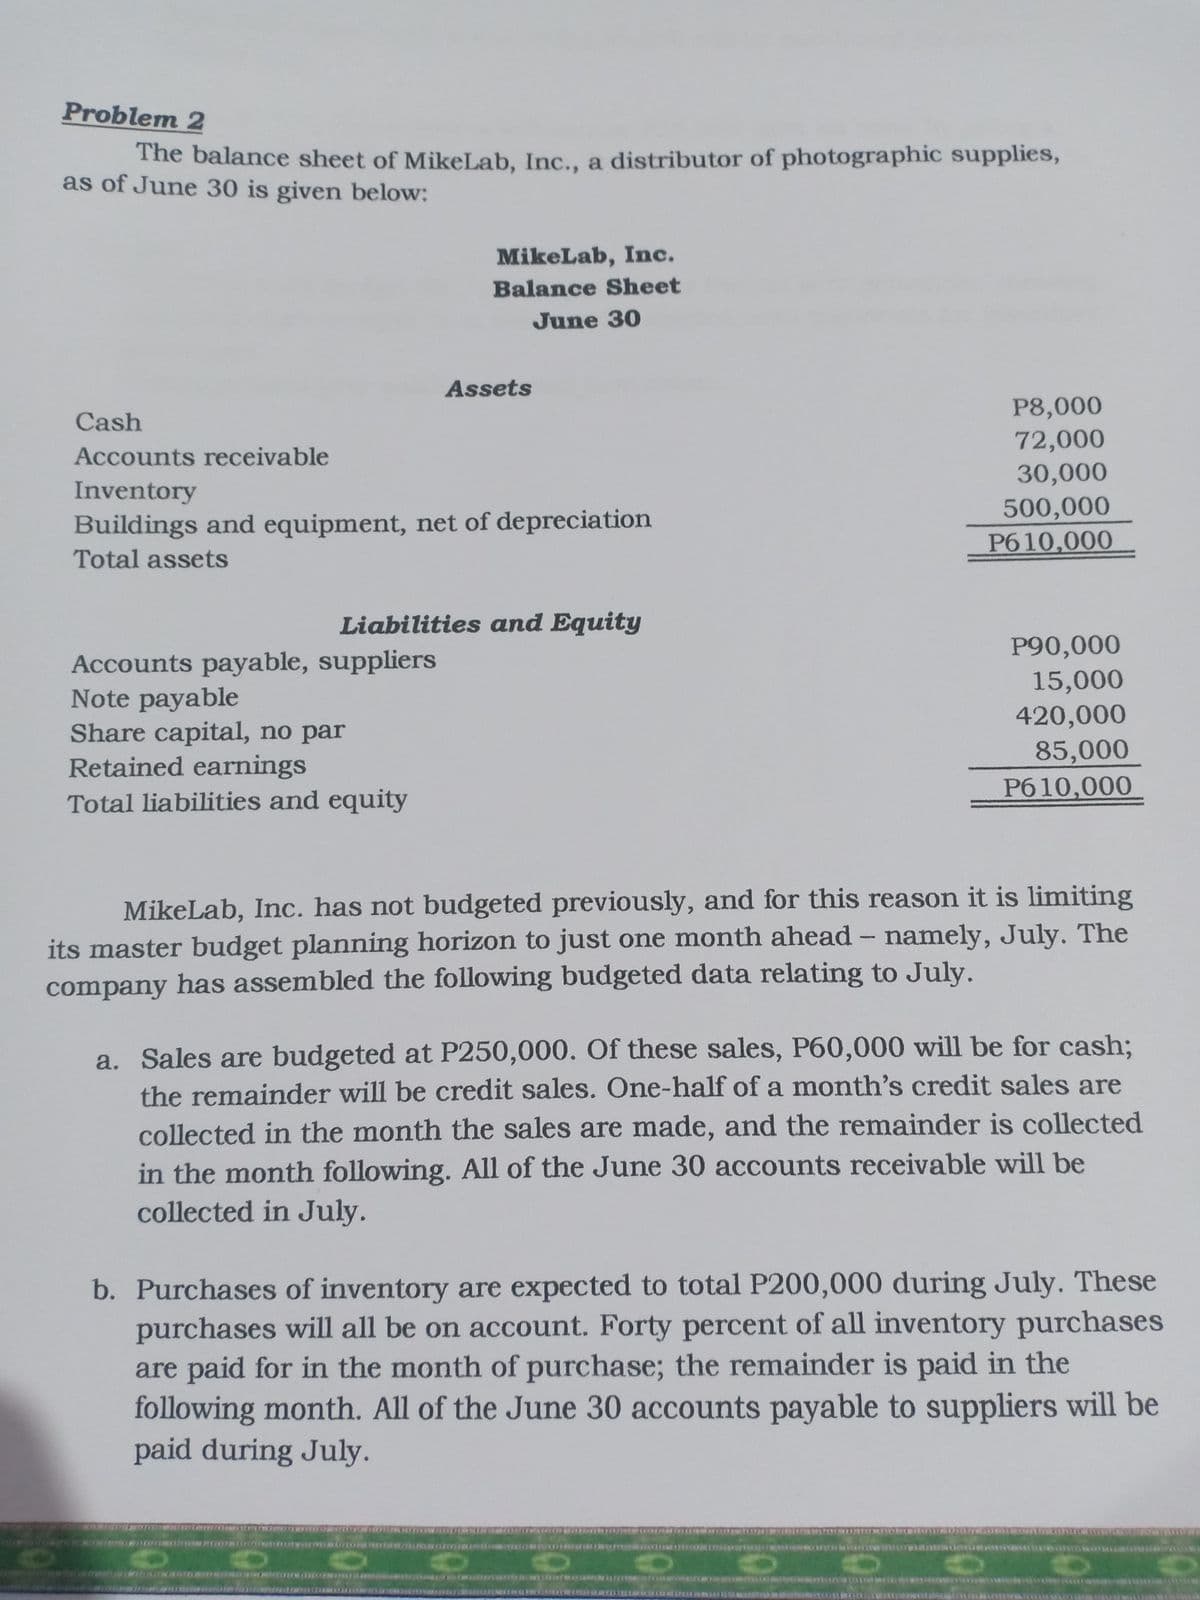 Problem 2
The balance sheet of MikeLab, Inc., a distributor of photographic supplies,
as of June 30 is given below:
MikeLab, Inc.
Balance Sheet
June 30
Assets
P8,000
72,000
30,000
Cash
Accounts receivable
Inventory
500,000
Buildings and equipment, net of depreciation
P610,000
Total assets
Liabilities and Equity
P90,000
Accounts payable, suppliers
Note payable
Share capital, no par
Retained earnings
Total liabilities and equity
15,000
420,000
85,000
P610,000
MikeLab, Inc. has not budgeted previously, and for this reason it is limiting
its master budget planning horizon to just one month ahead - namely, July. The
company has assembled the following budgeted data relating to July.
a. Sales are budgeted at P250,000. Of these sales, P60,000 will be for cash;
the remainder will be credit sales. One-half of a month's credit sales are
collected in the month the sales are made, and the remainder is collected
in the month following. All of the June 30 accounts receivable will be
collected in July.
b. Purchases of inventory are expected to total P200,000 during July. These
purchases will all be on account. Forty percent of all inventory purchases
are paid for in the month of purchase; the remainder is paid in the
following month. All of the June 30 accounts payable to suppliers will be
paid during July.
